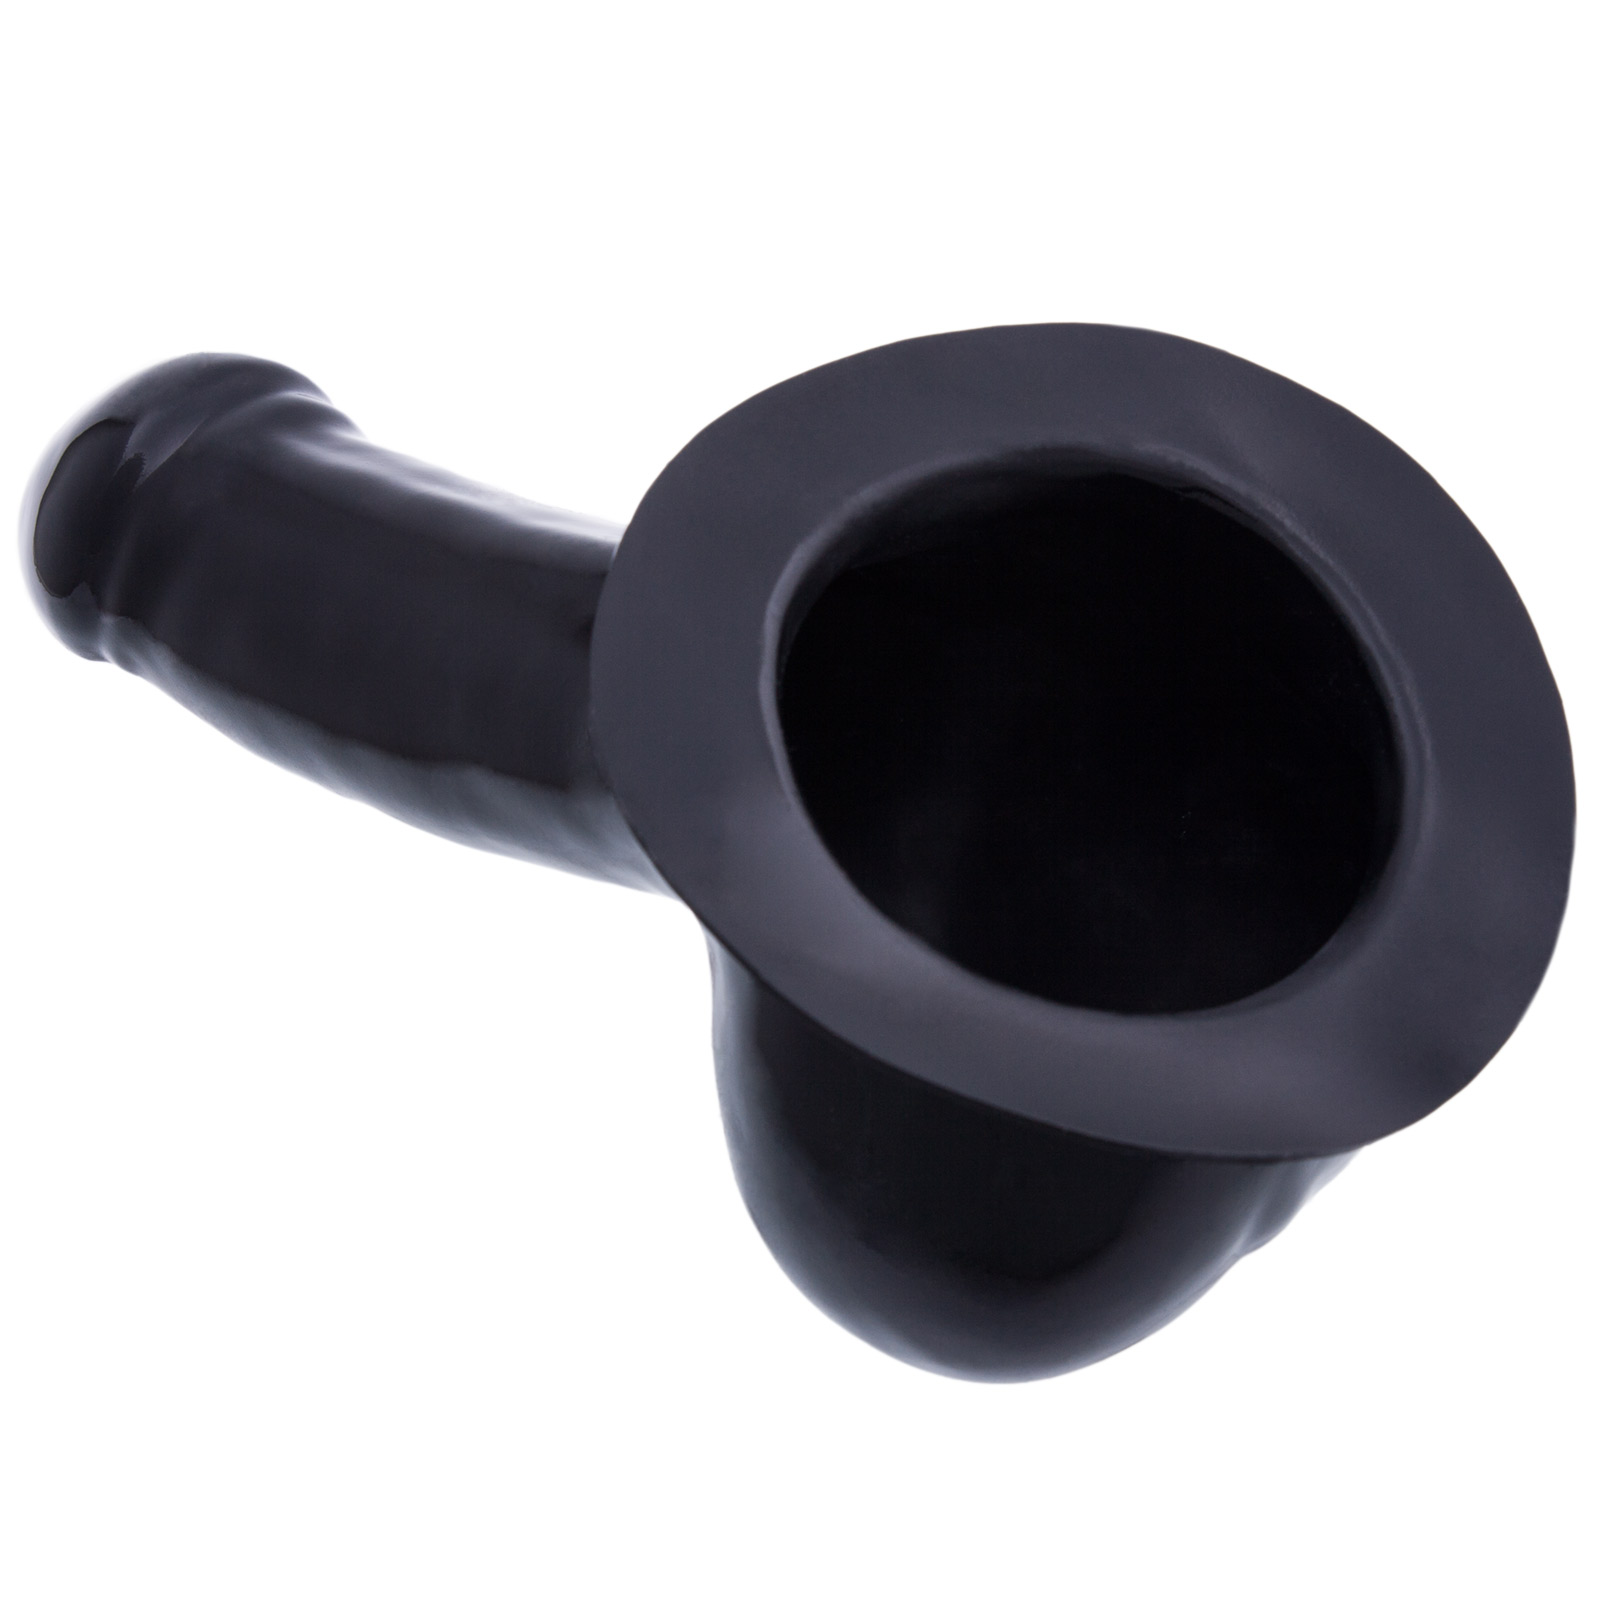 Toylie Latex Penis Sleeve «ADAM» black, with base plate for sticking to latex clothing - suitable for vegans